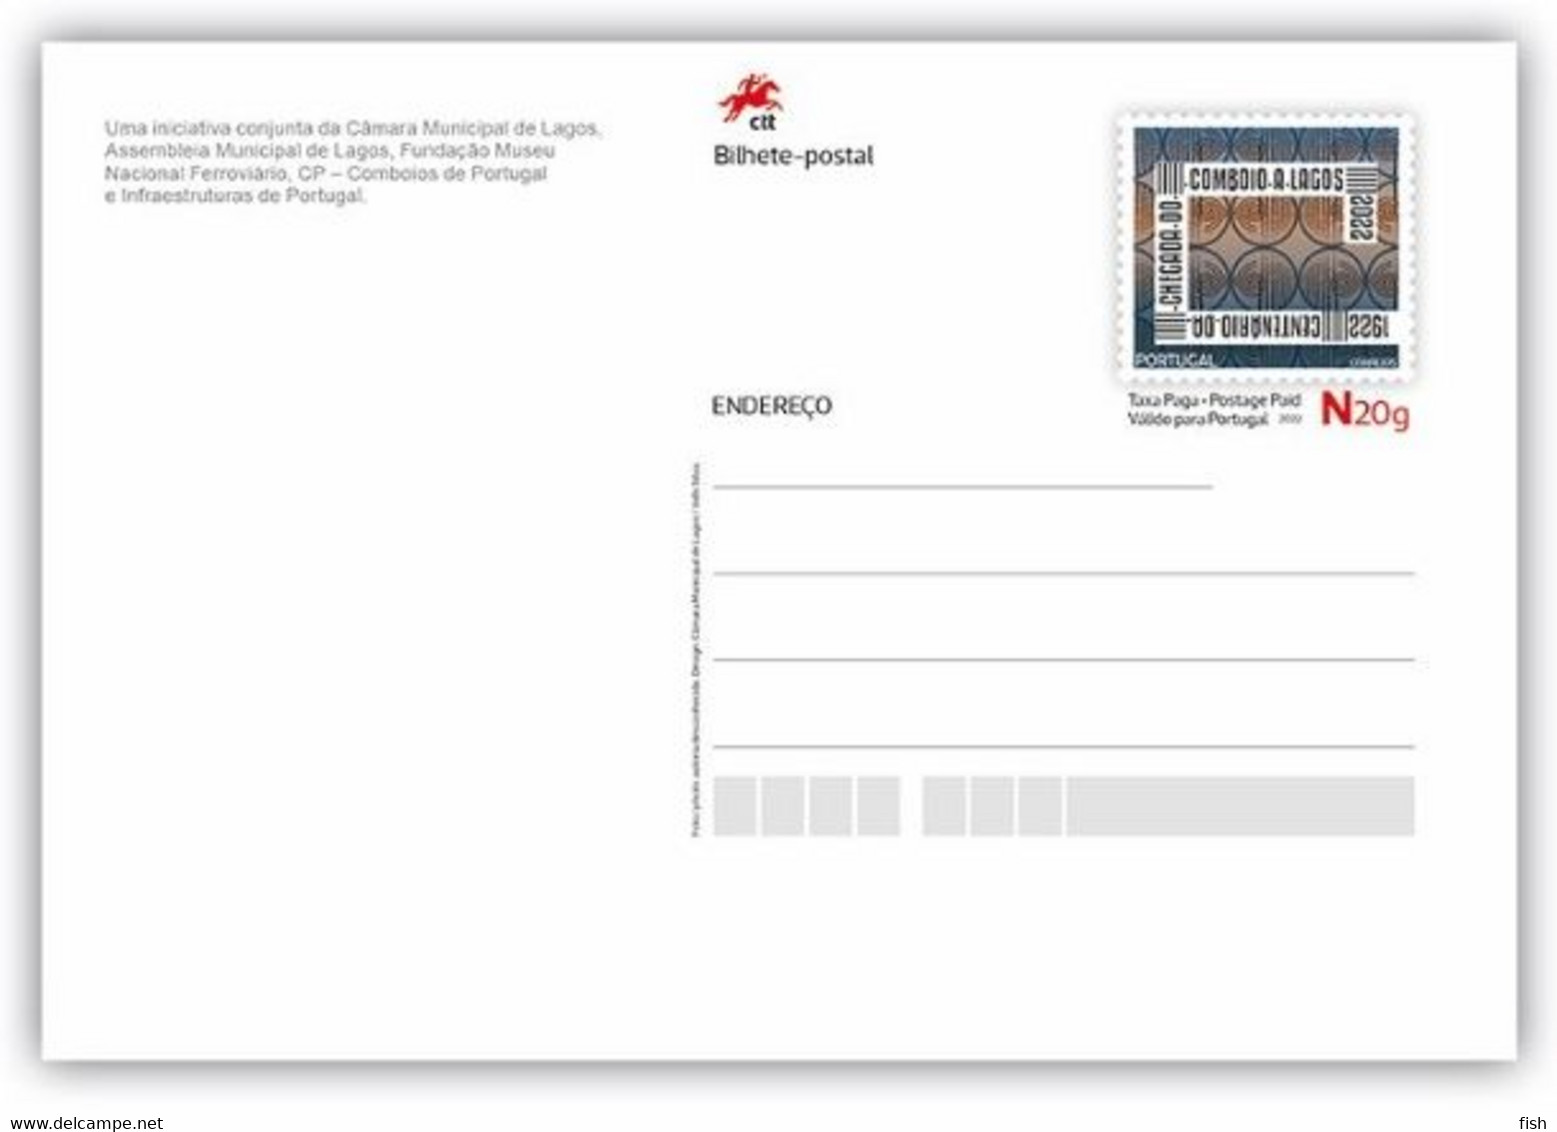 Portugal ** & Postal Stationary, Arrival Of The Train To Lagos 2022 (67868) - Inaugurations